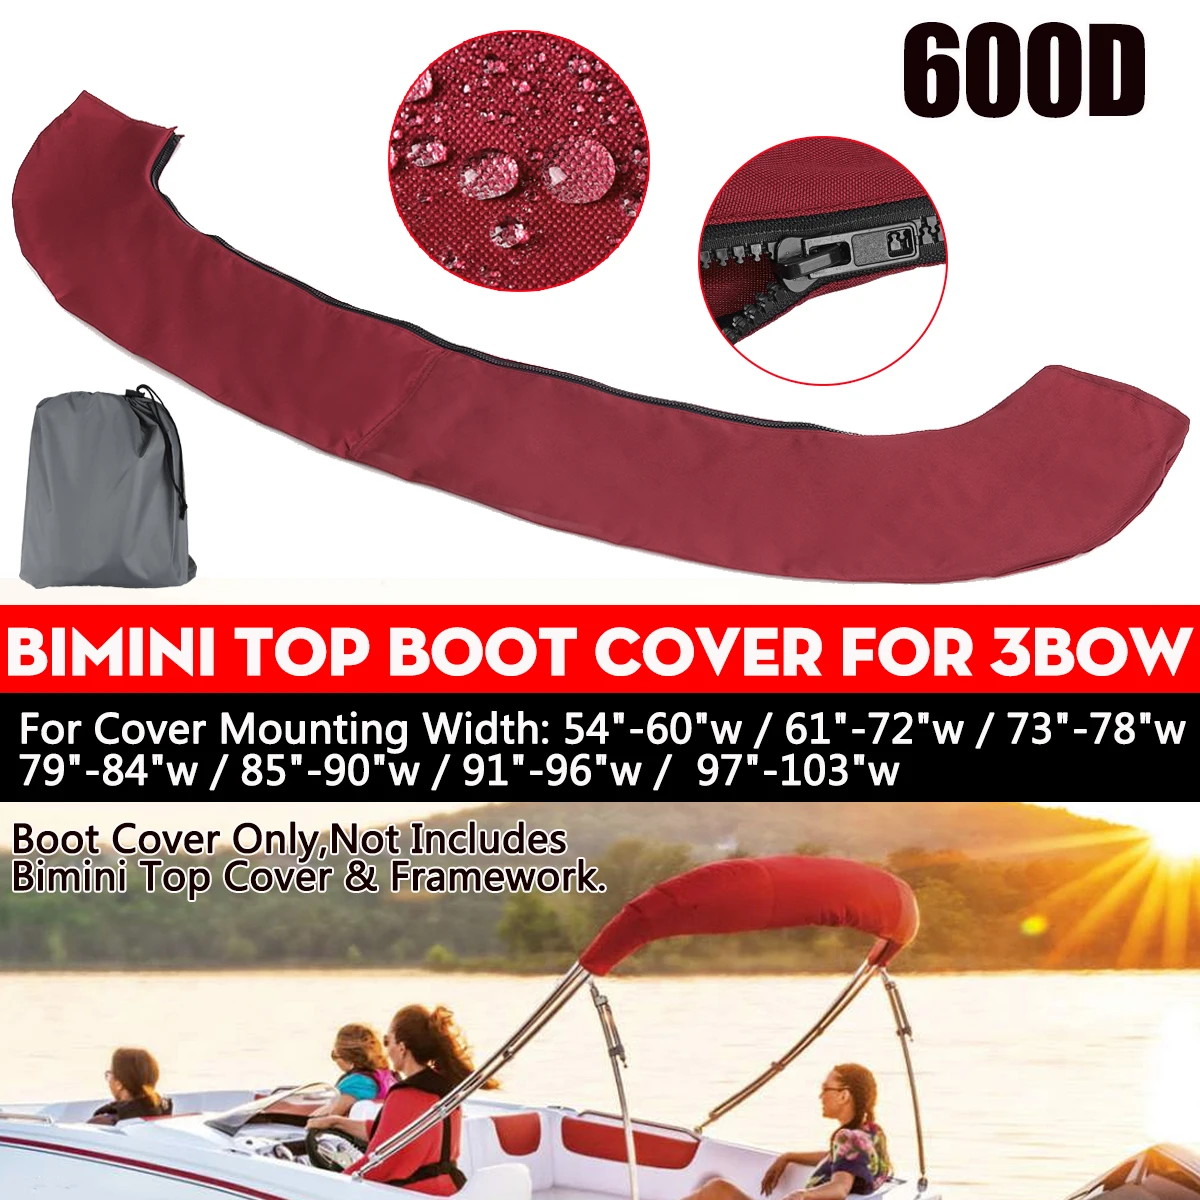 600D 3 Bow Bimini Top Boot Cover No Frame Waterproof Yacht Boat Cover with Zipper Anti UV Dustproof Cover Marine Accessories boat flush mount stereo cover housing radio splash guard abs waterproof for marine caravan rv yacht radio cd mp3 dvd etc